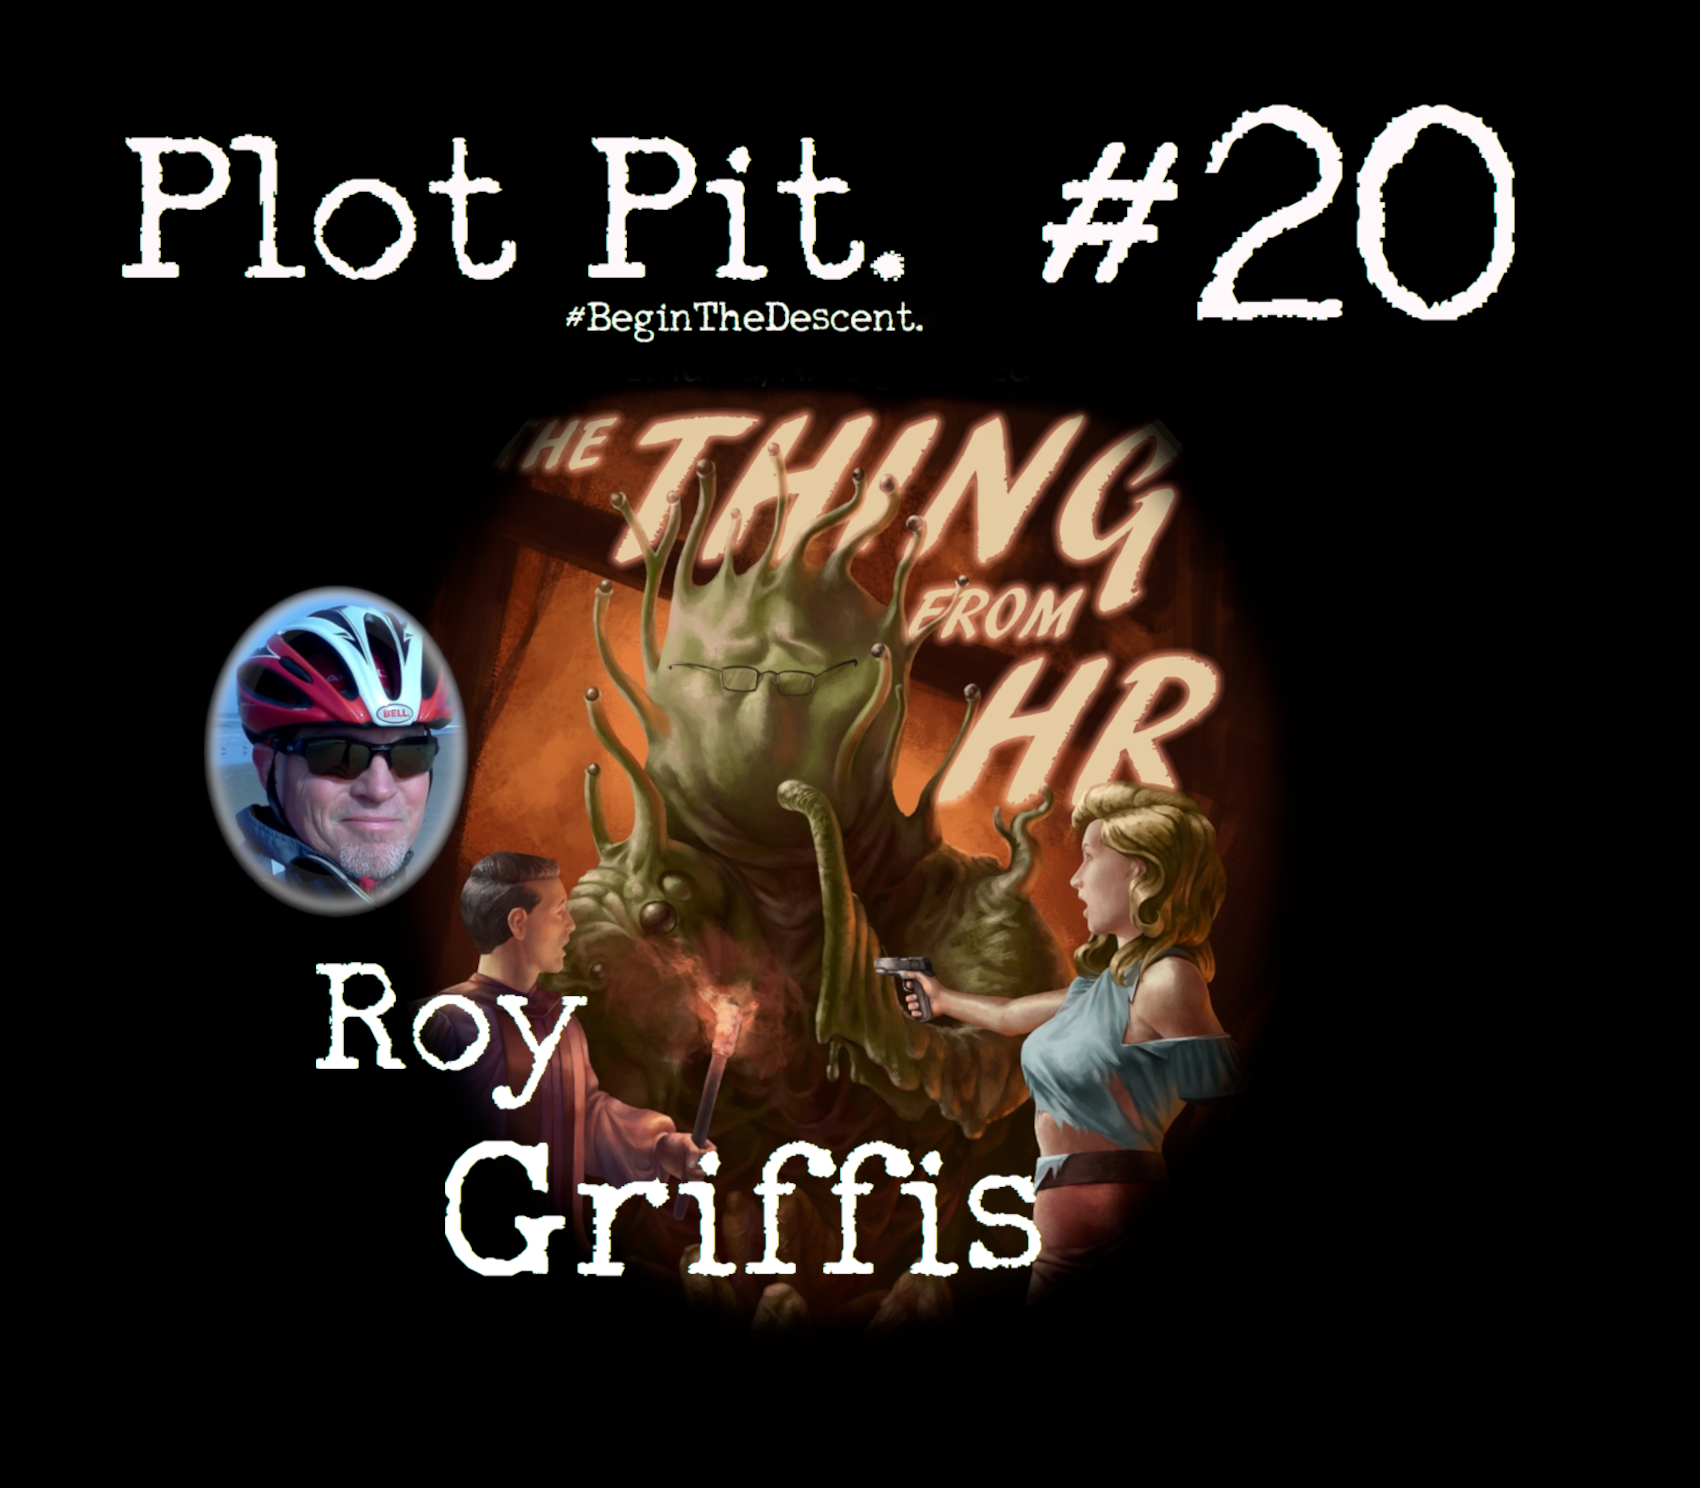 Roy Griffis & The Thing From HR!